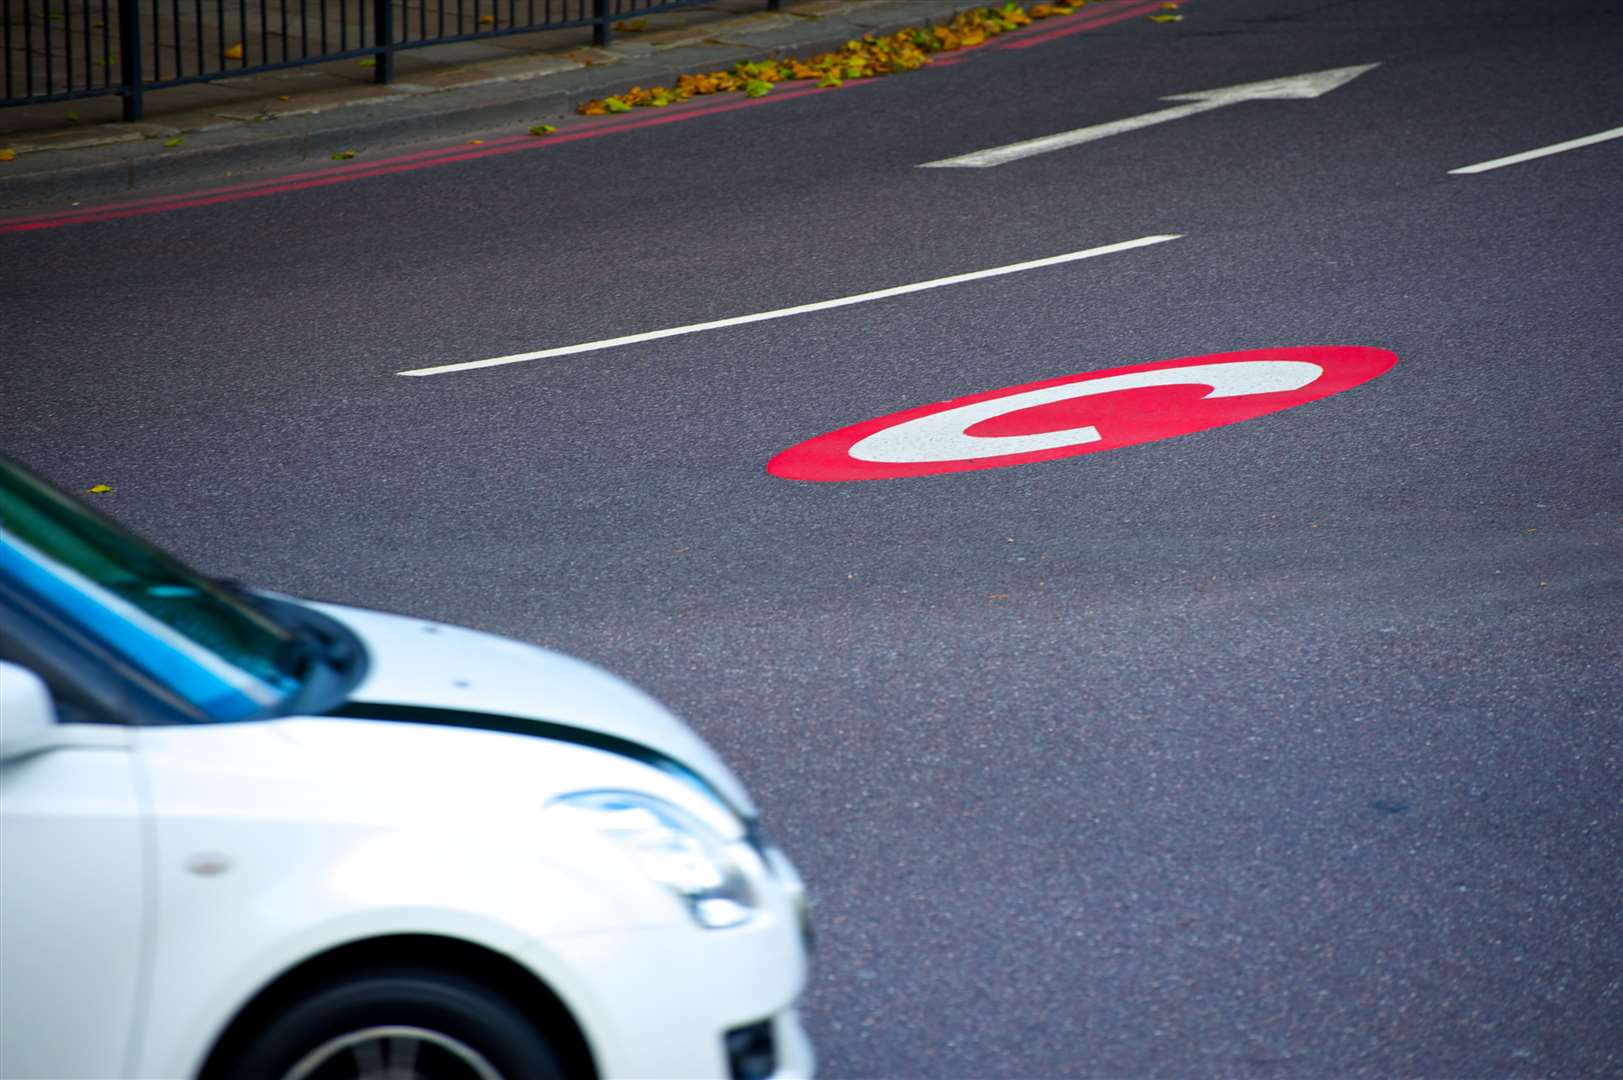 Transport for London is consulting on proposals to retain the increase in the congestion charge but reduce its hours of operation.